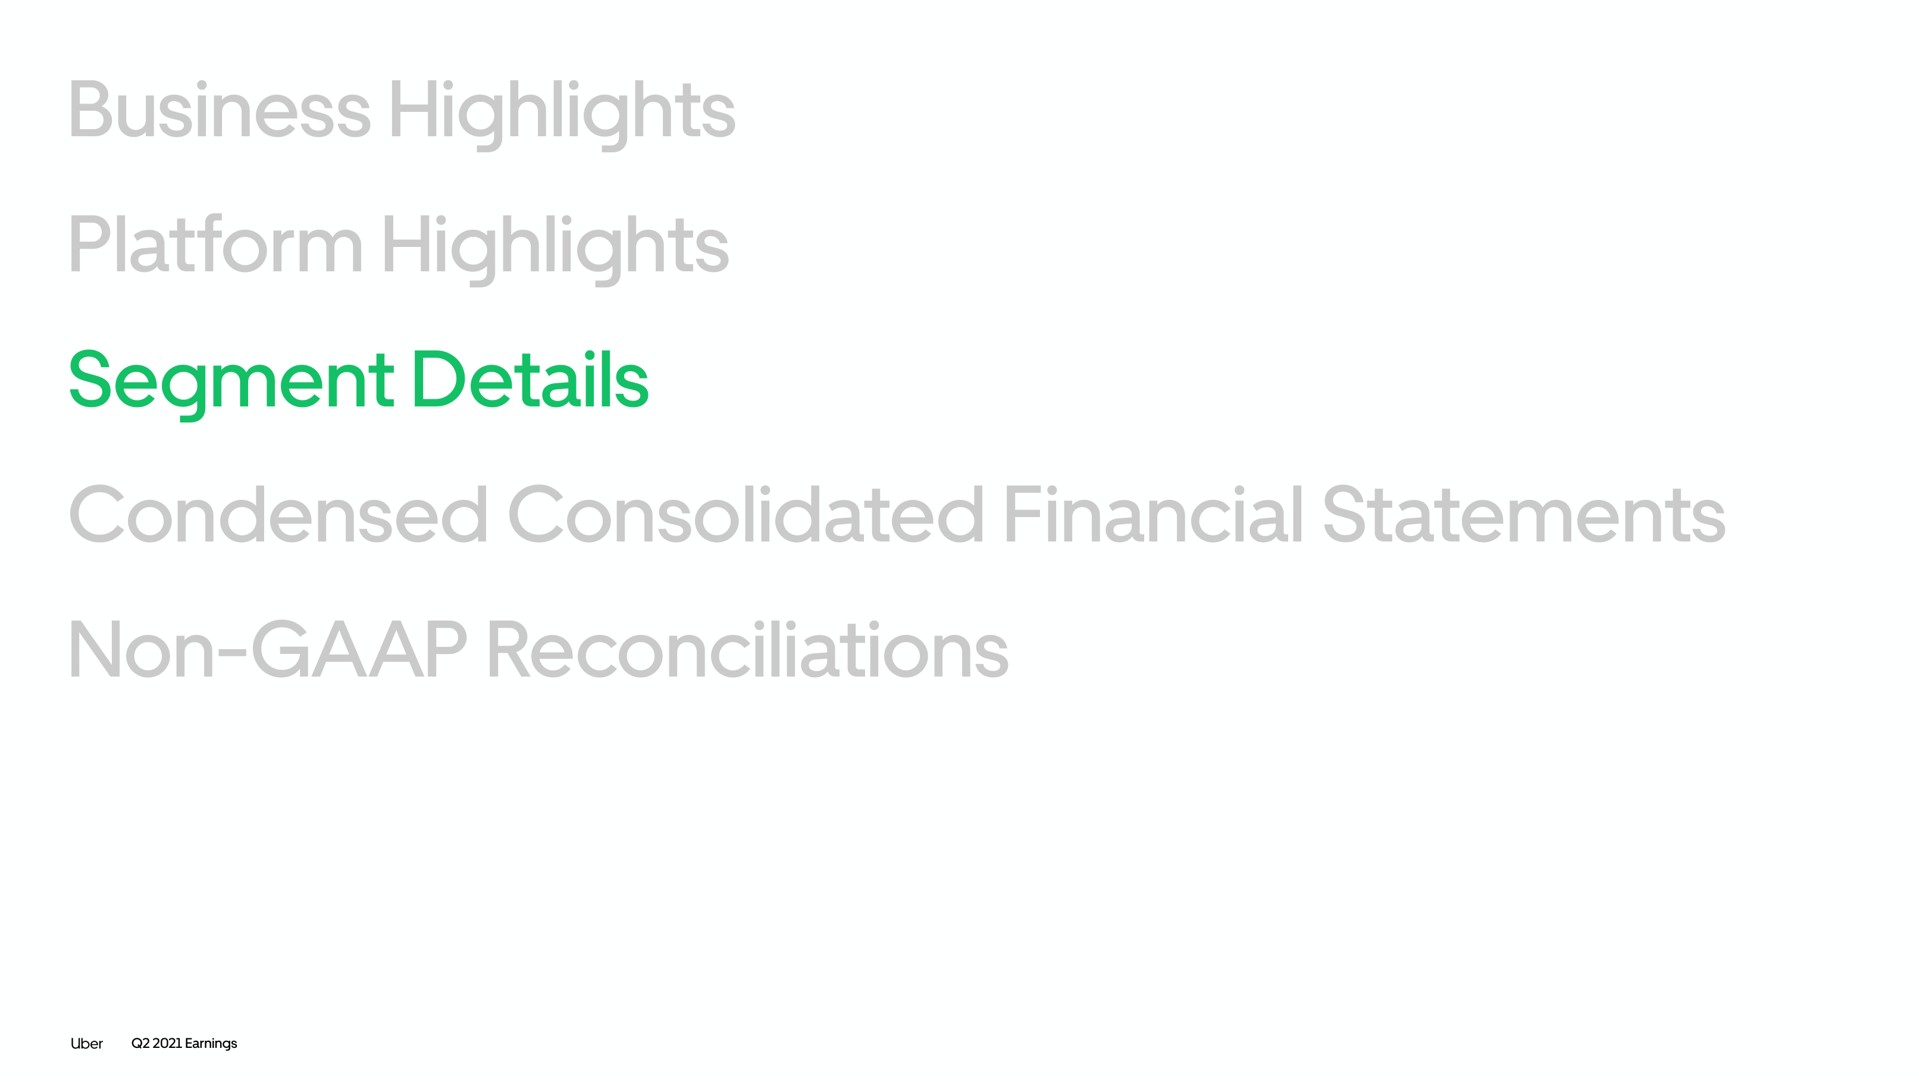 business highlights platform highlights segment details condensed consolidated financial statements non reconciliations | Uber